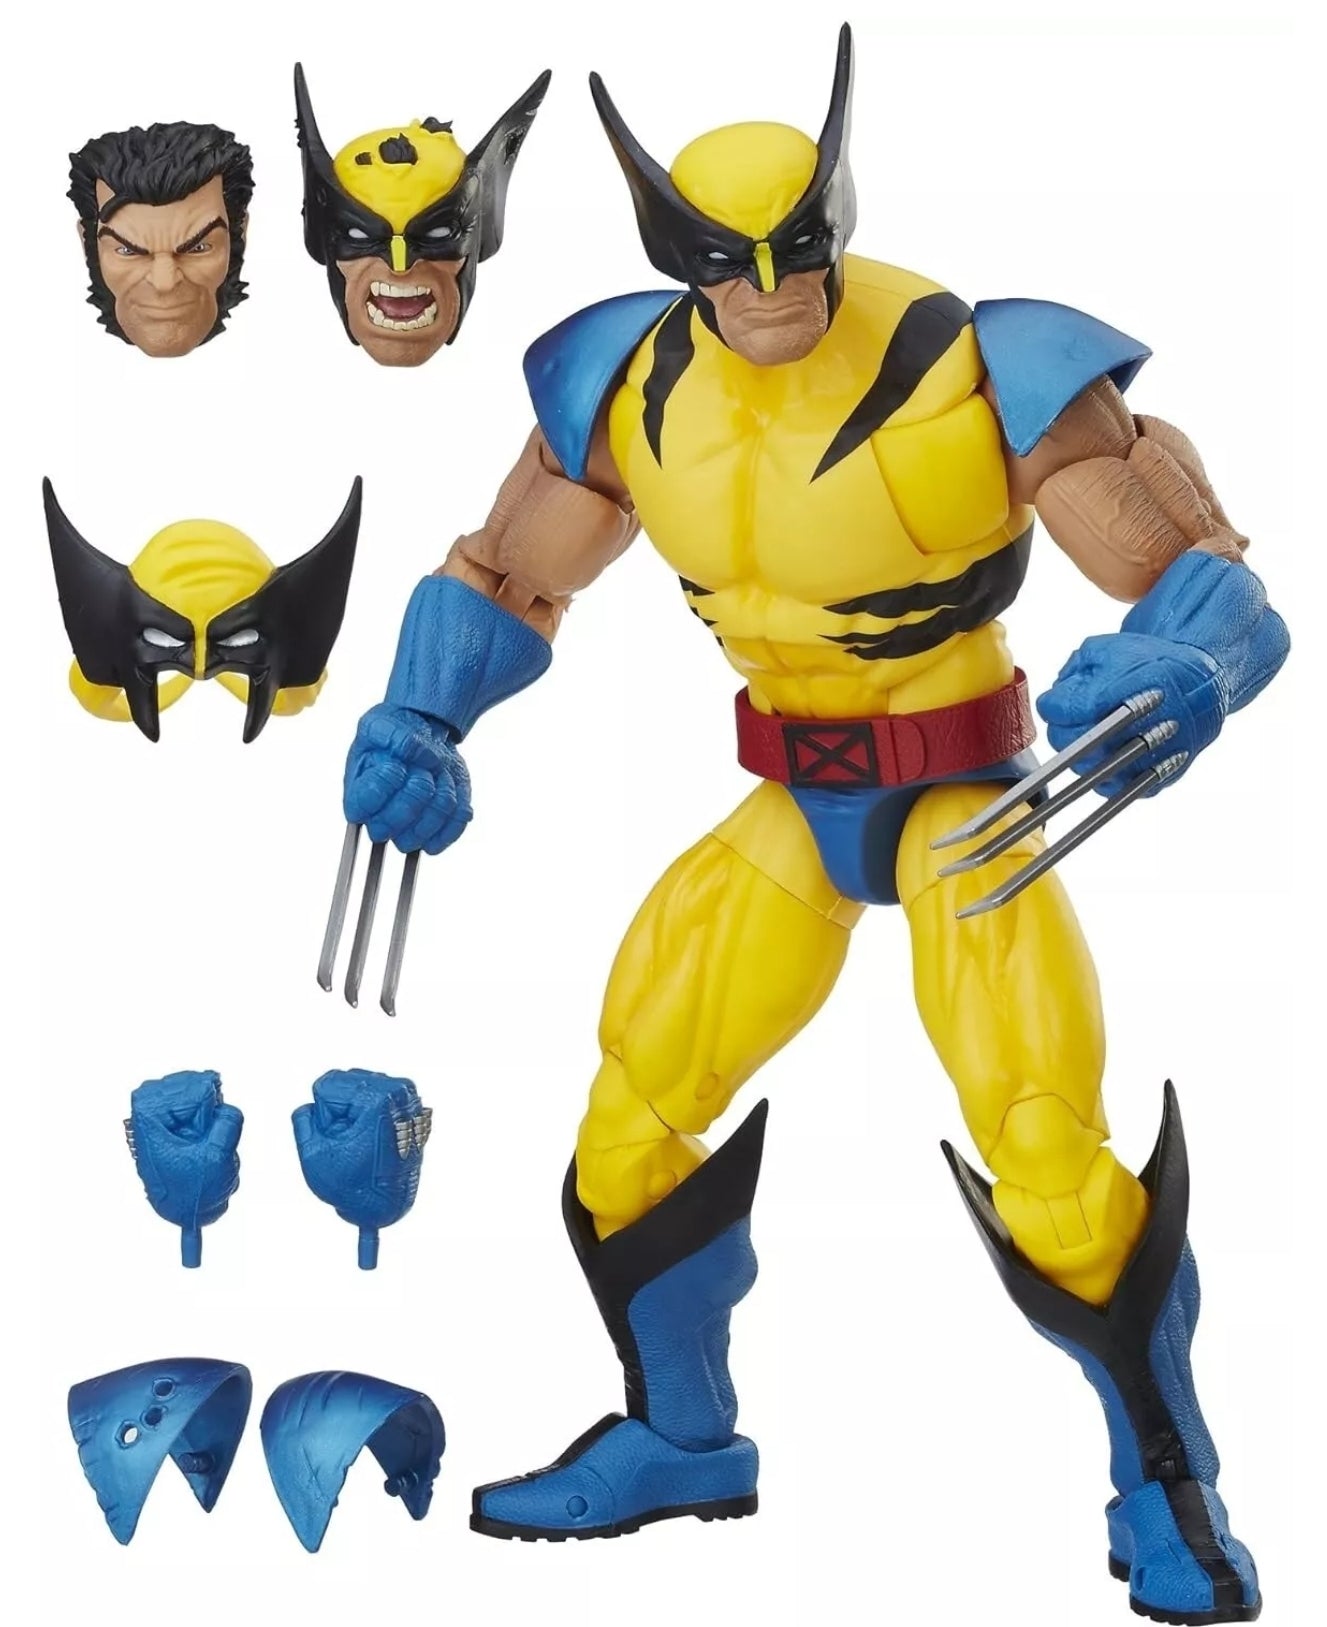 Marvel Legends 12-inch Wolverine Figure with Accessories and Articulation